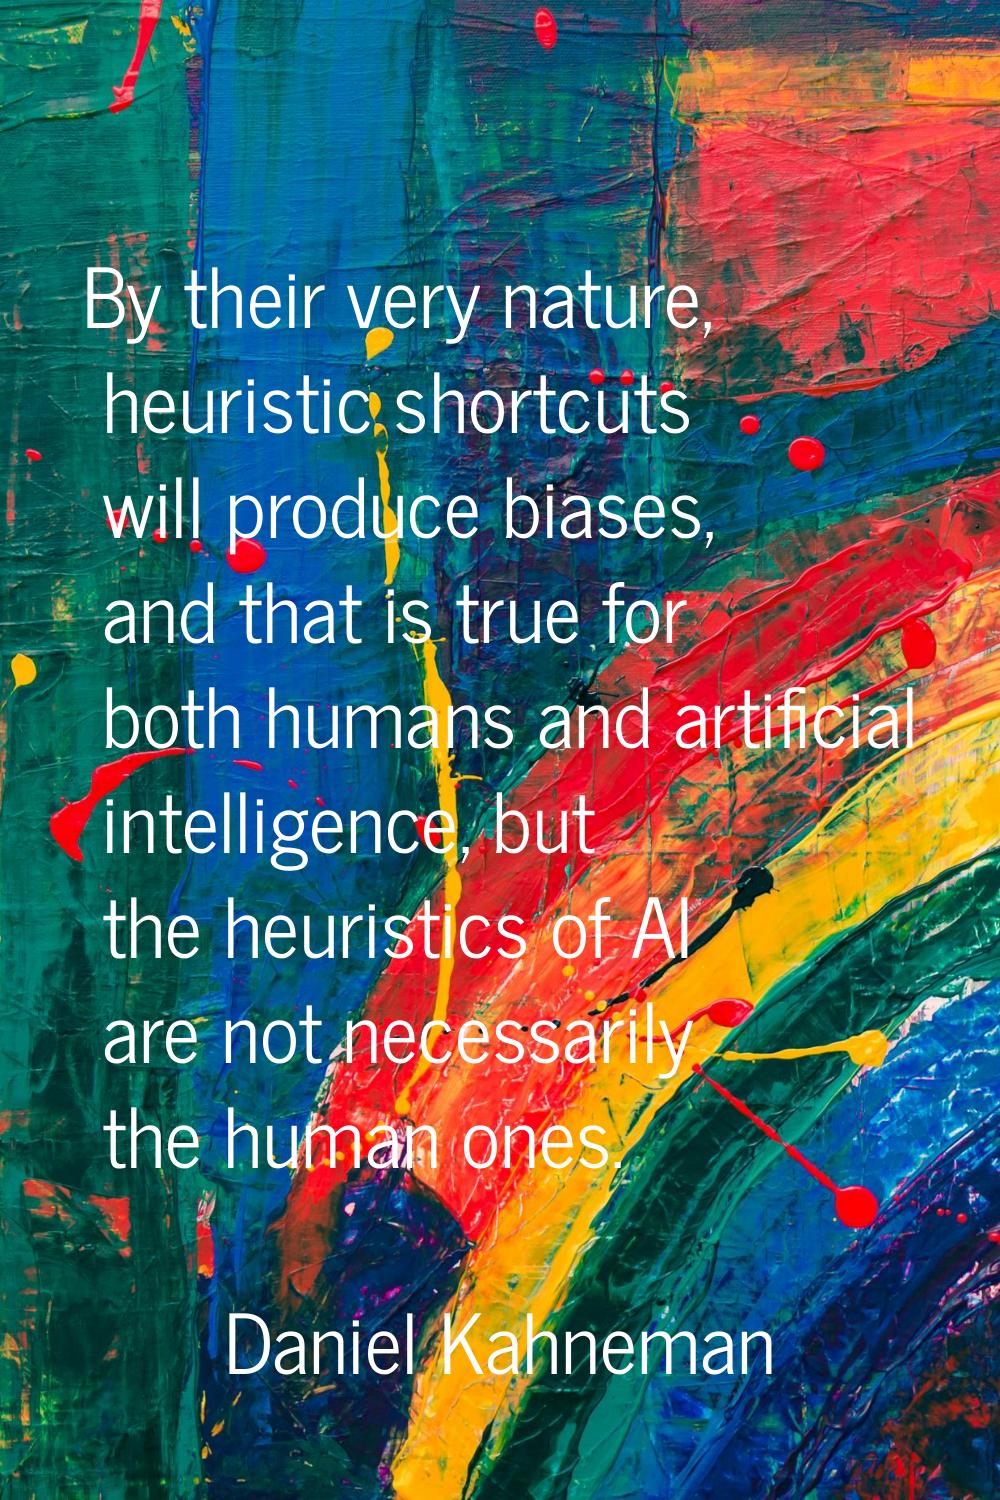 By their very nature, heuristic shortcuts will produce biases, and that is true for both humans and